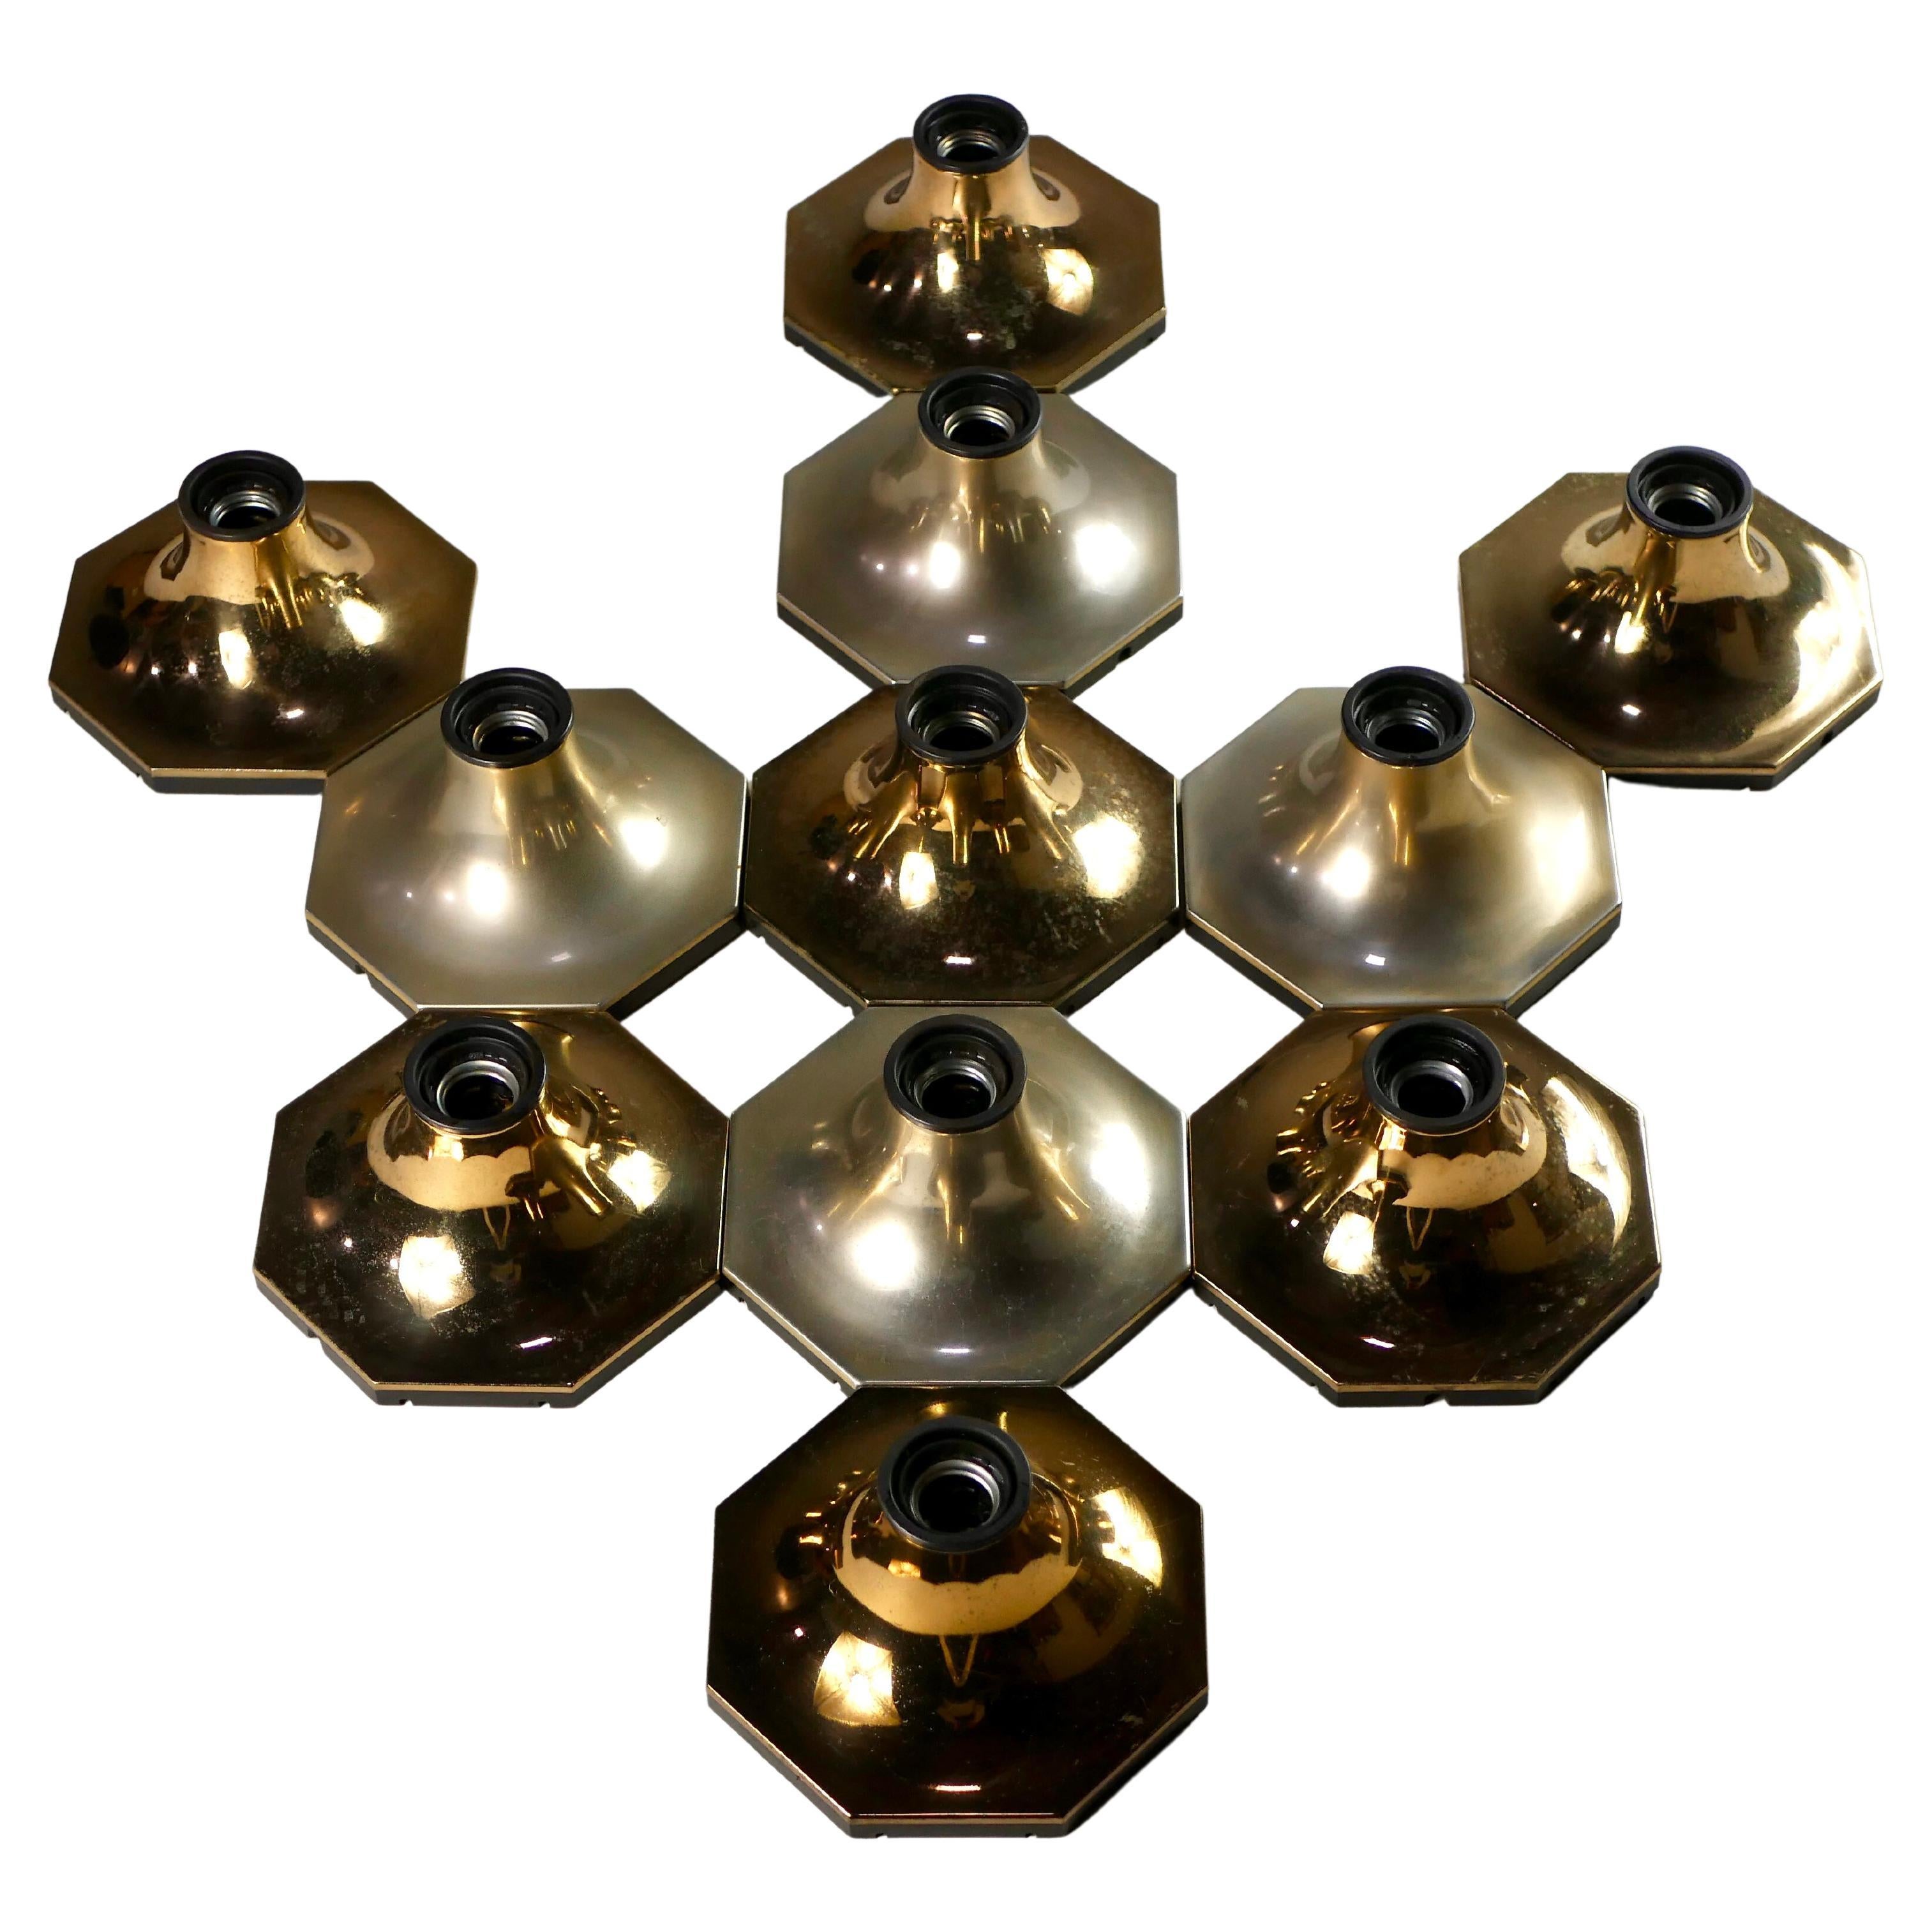 Beautiful octogonal brass wall lights designed in the 1970s by Motoko Ishii for Dil Italy.
Patinated brass, some are more gold, some more silver.
Easy to fix, easy to rearrange.
Dimensions : 17x17cm, 10cm depth.